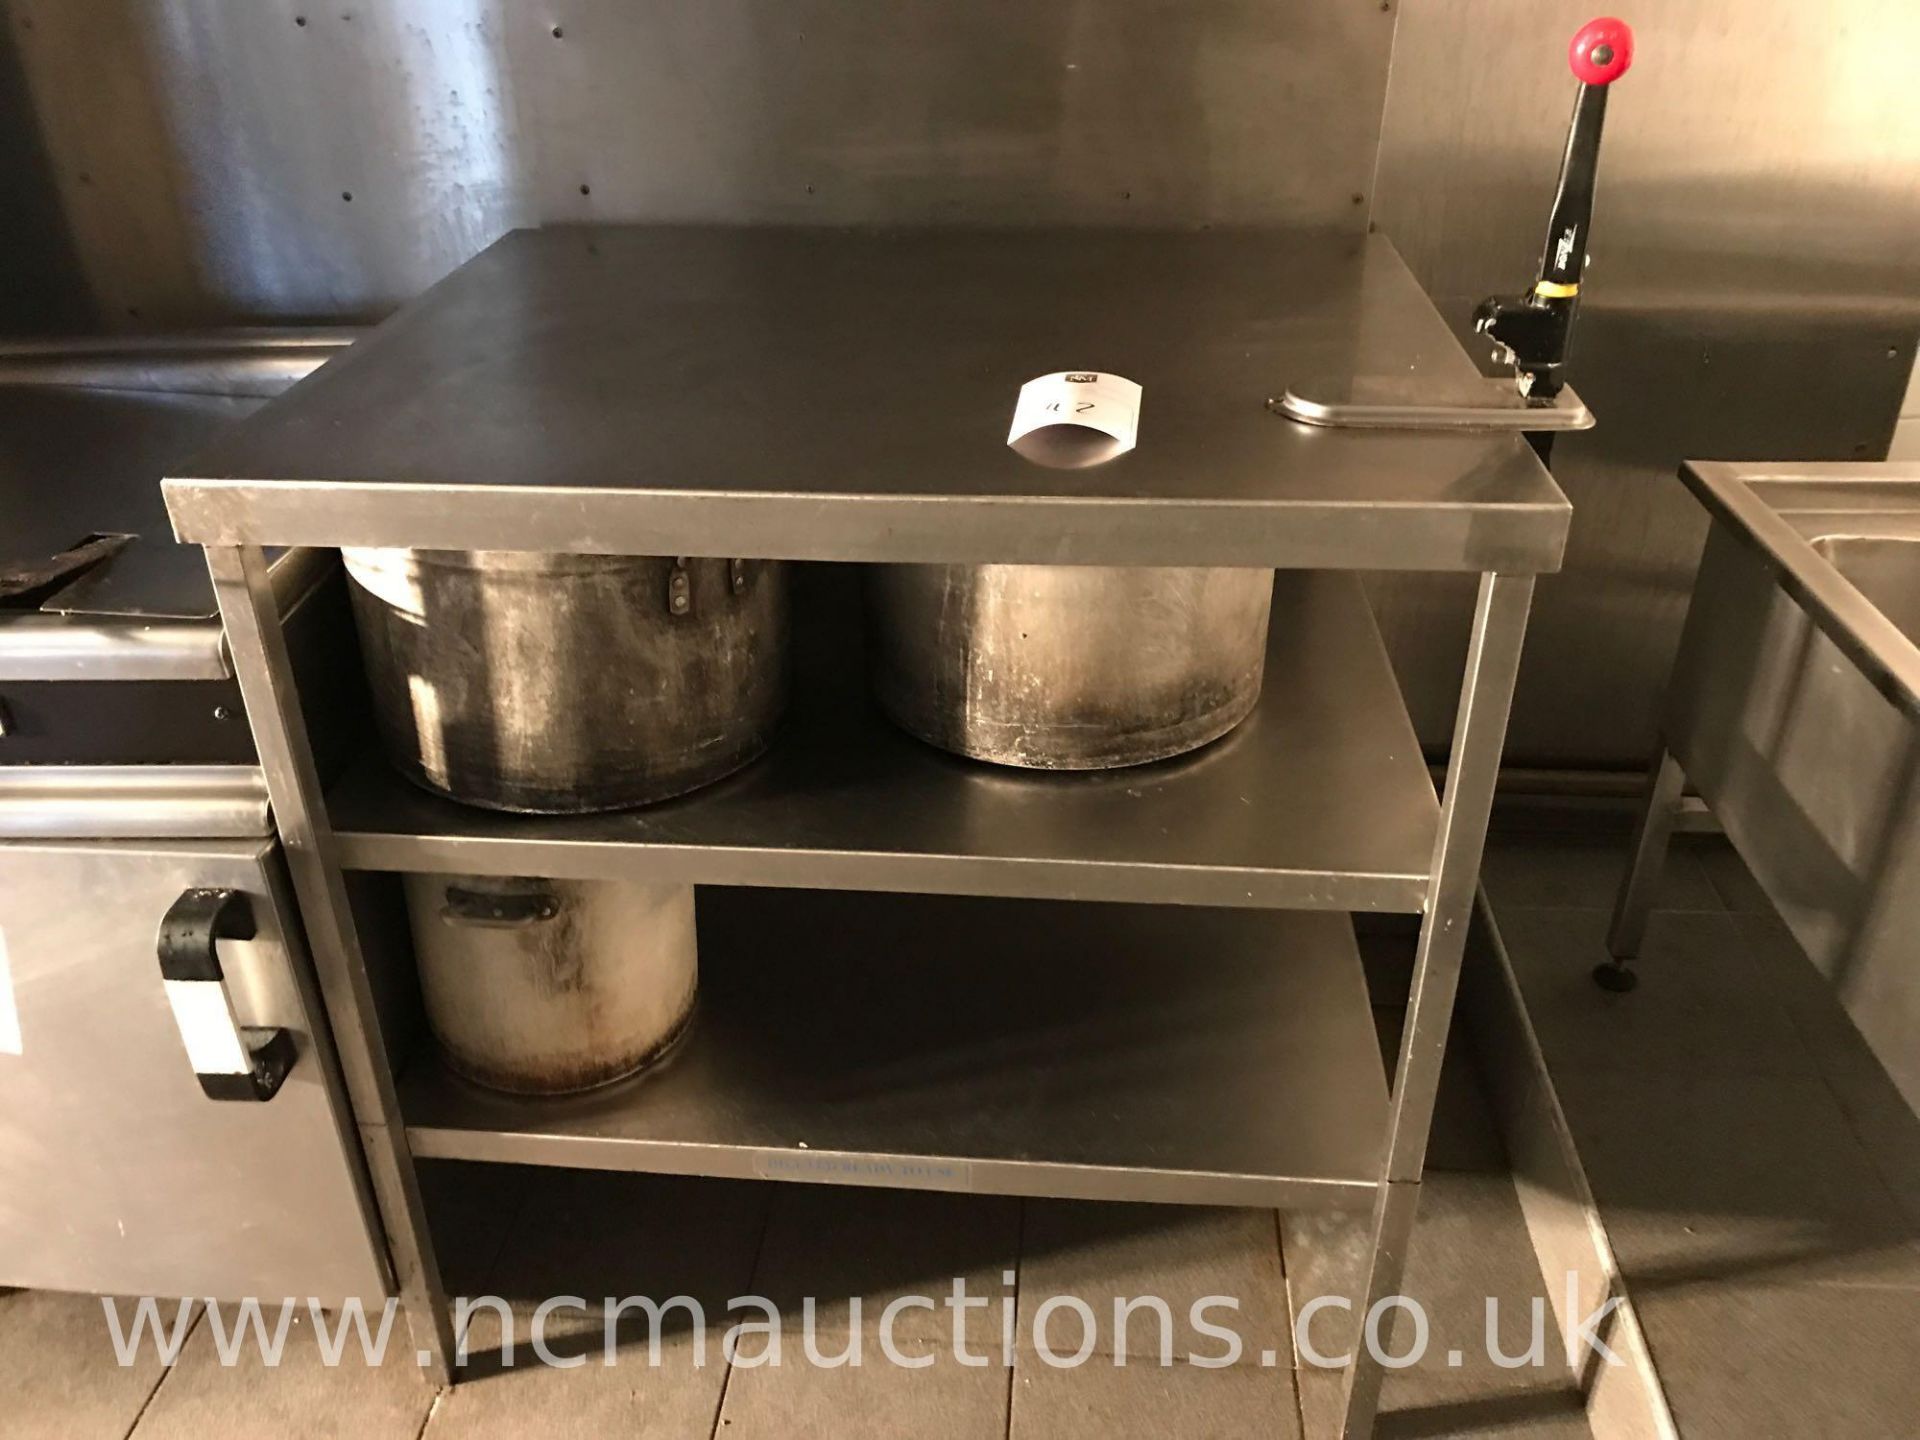 Stainless steel counter with under shelving